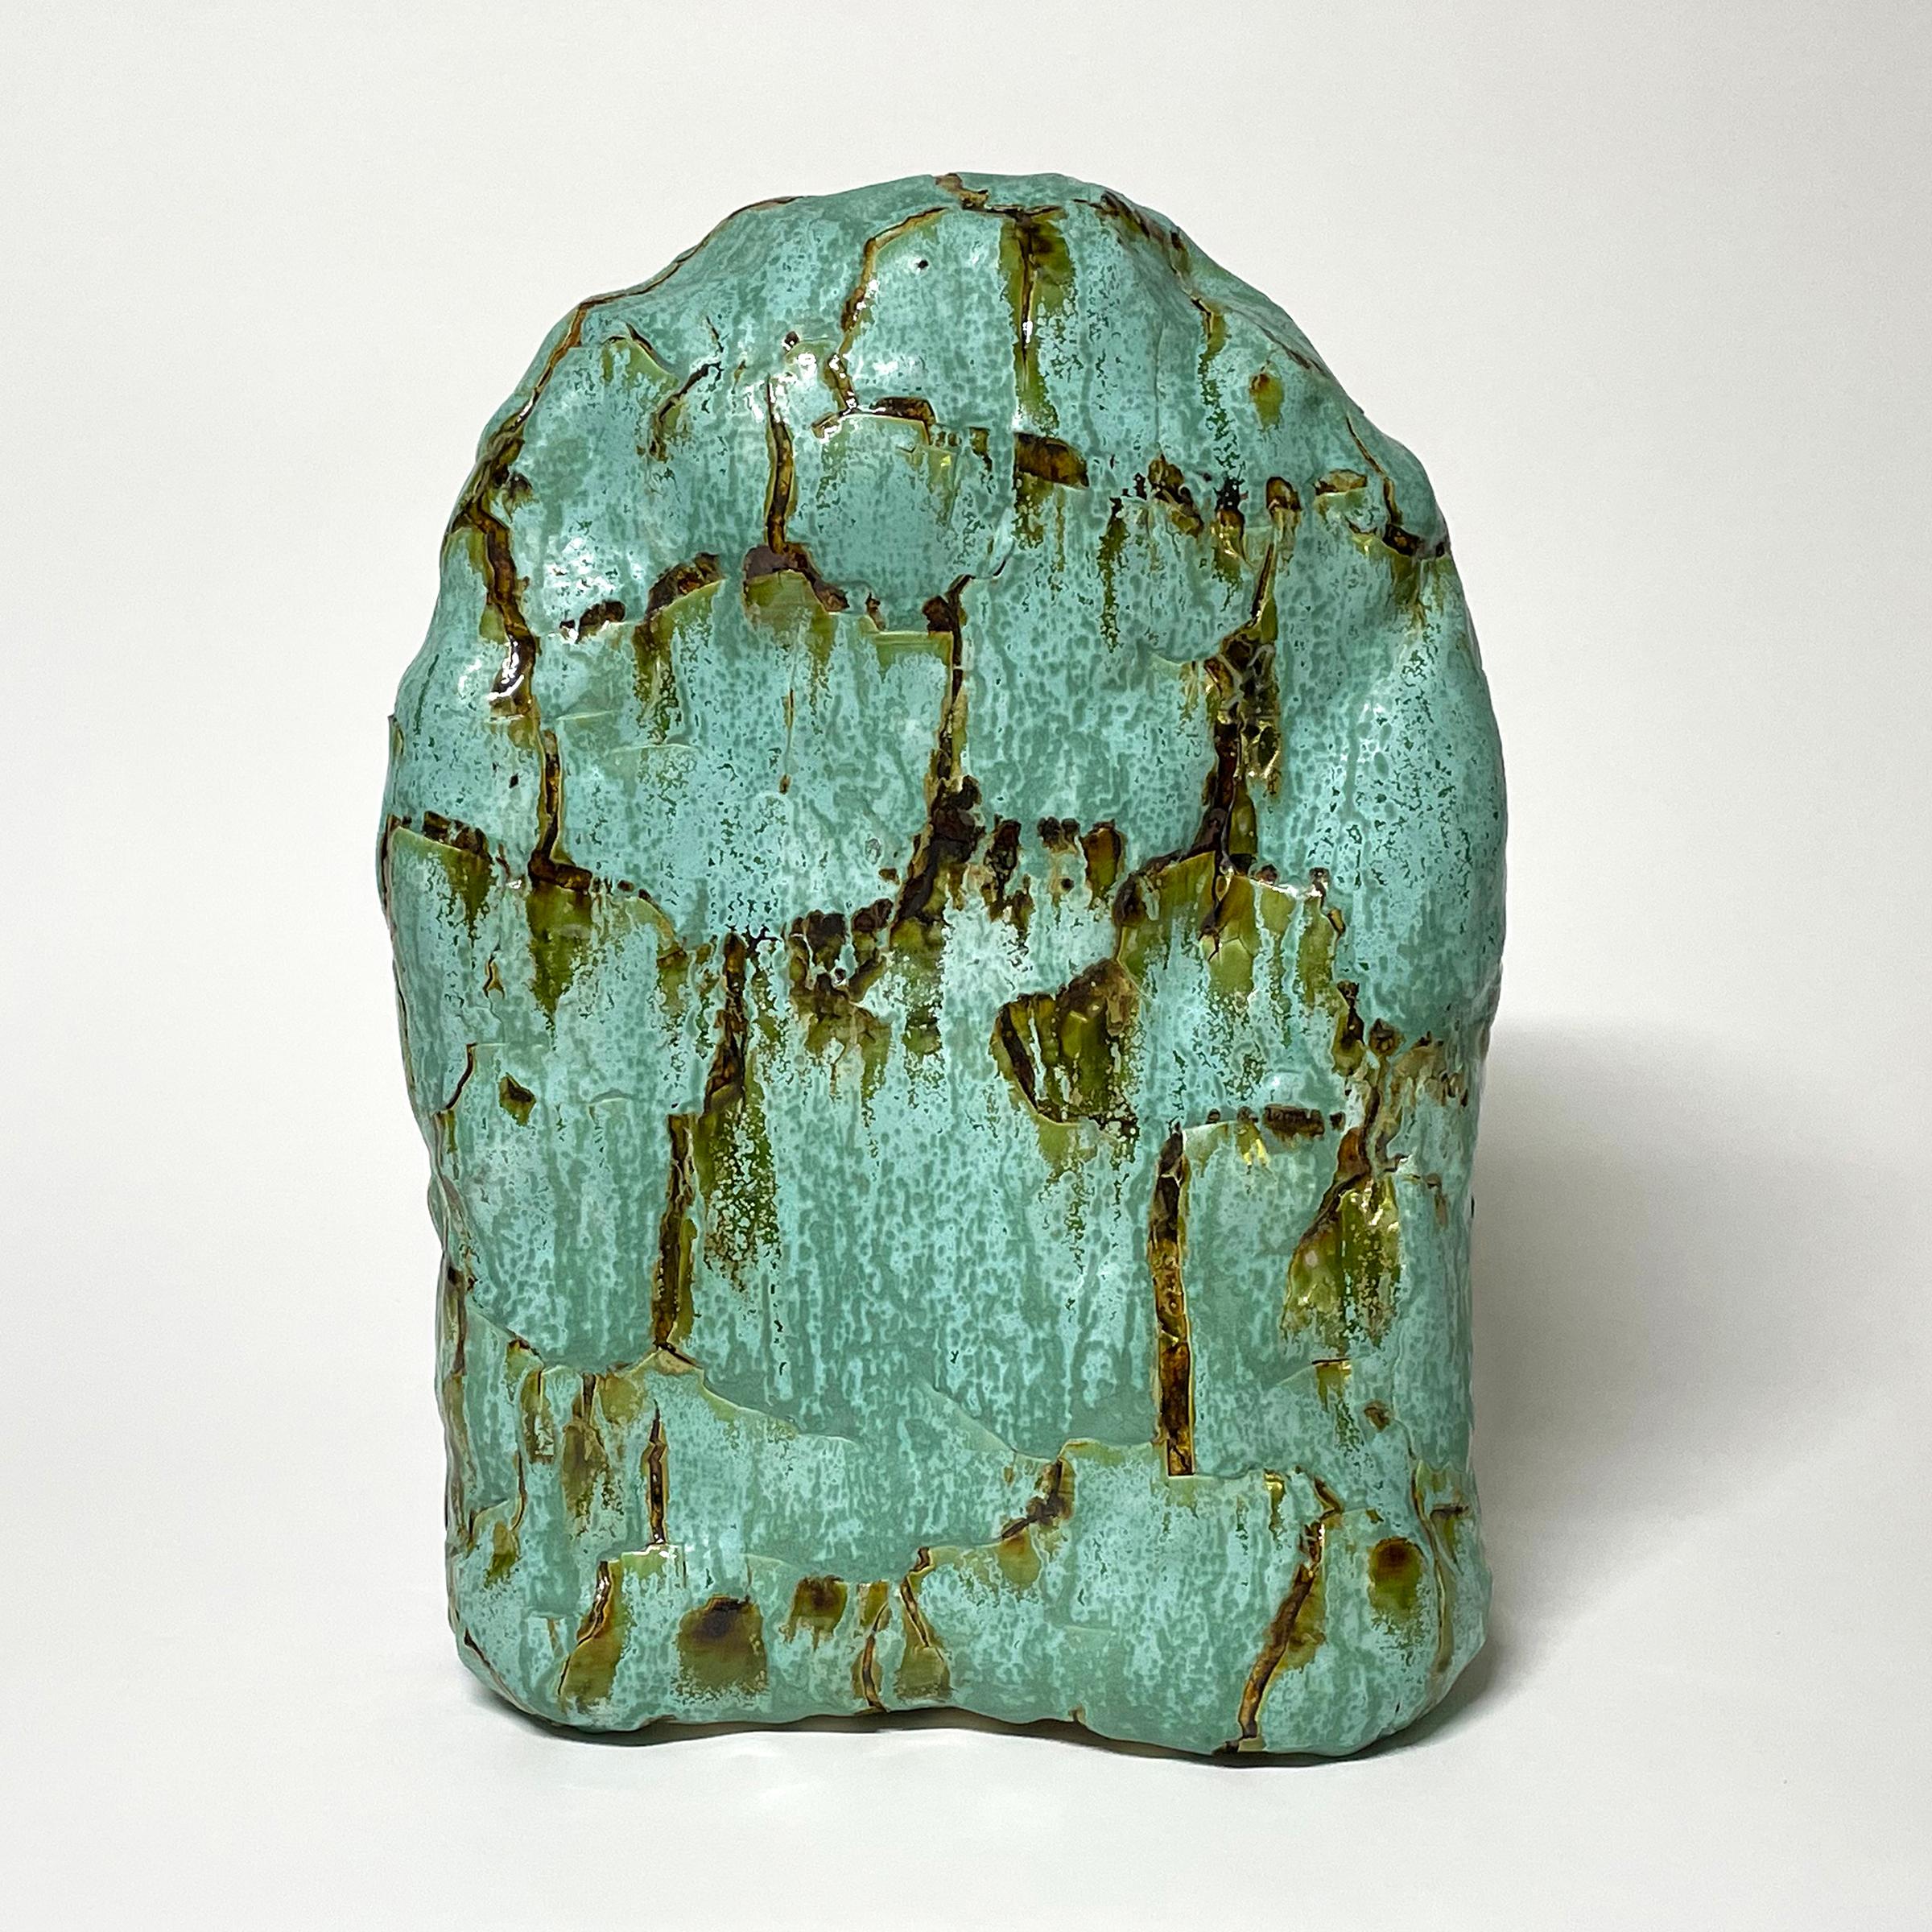 Glazed ceramic sculpture by William Edwards  2016
Hand built earthenware sculpture, fired multiple times to achieve a textured surface of random abstraction, in hues of green with amber gloss glaze breaking through.

William received his BFA in